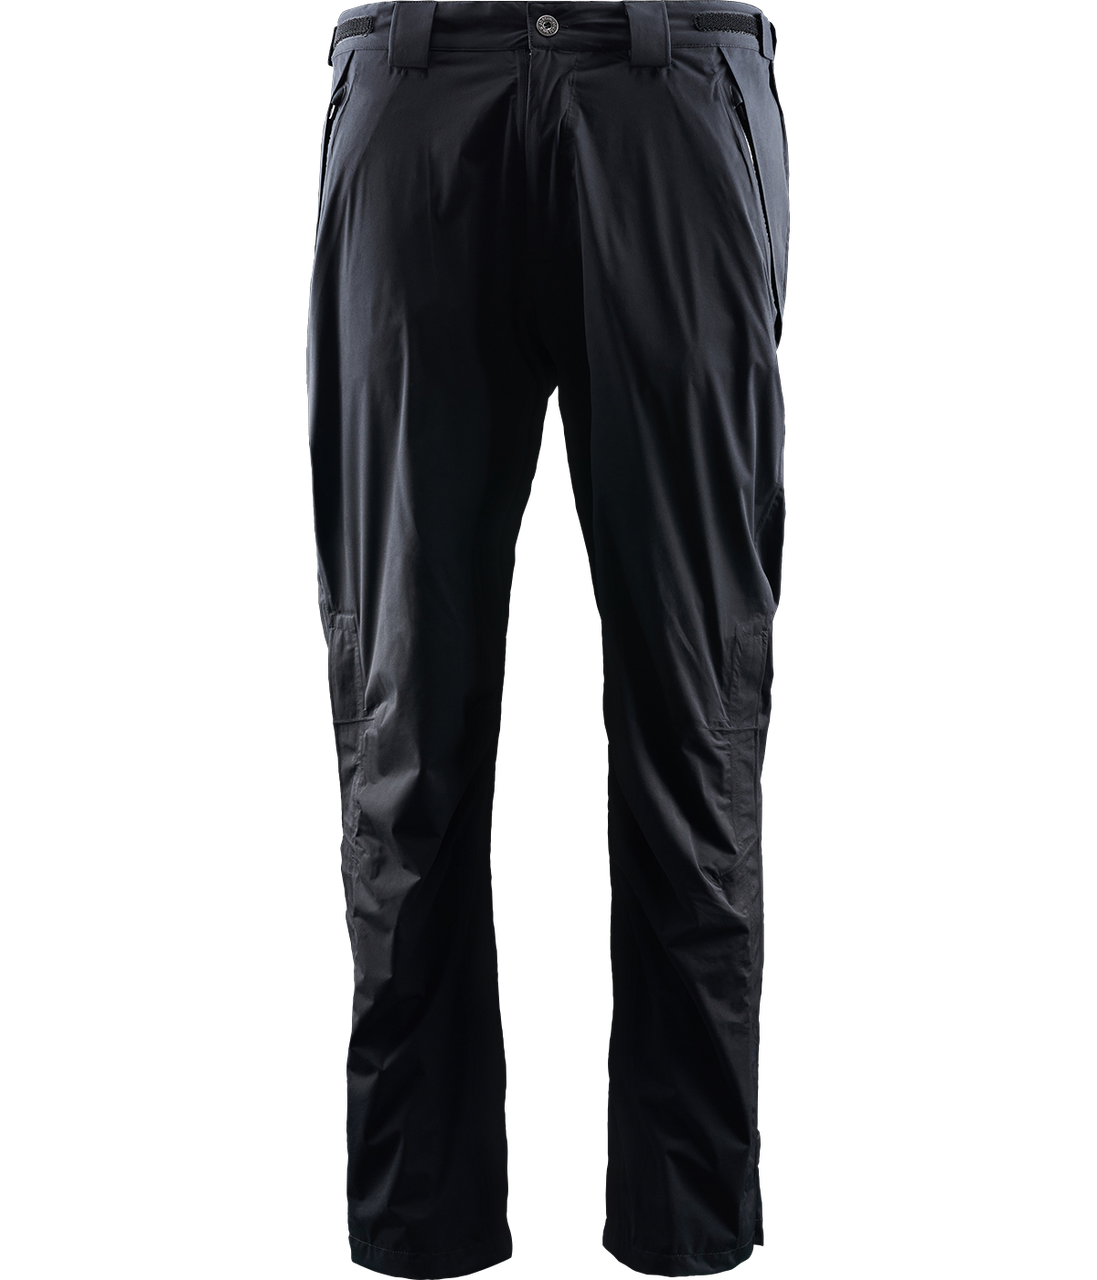 Abacus Sports Wear: Men’s High-Performance Raintrousers – Pitch 37.5